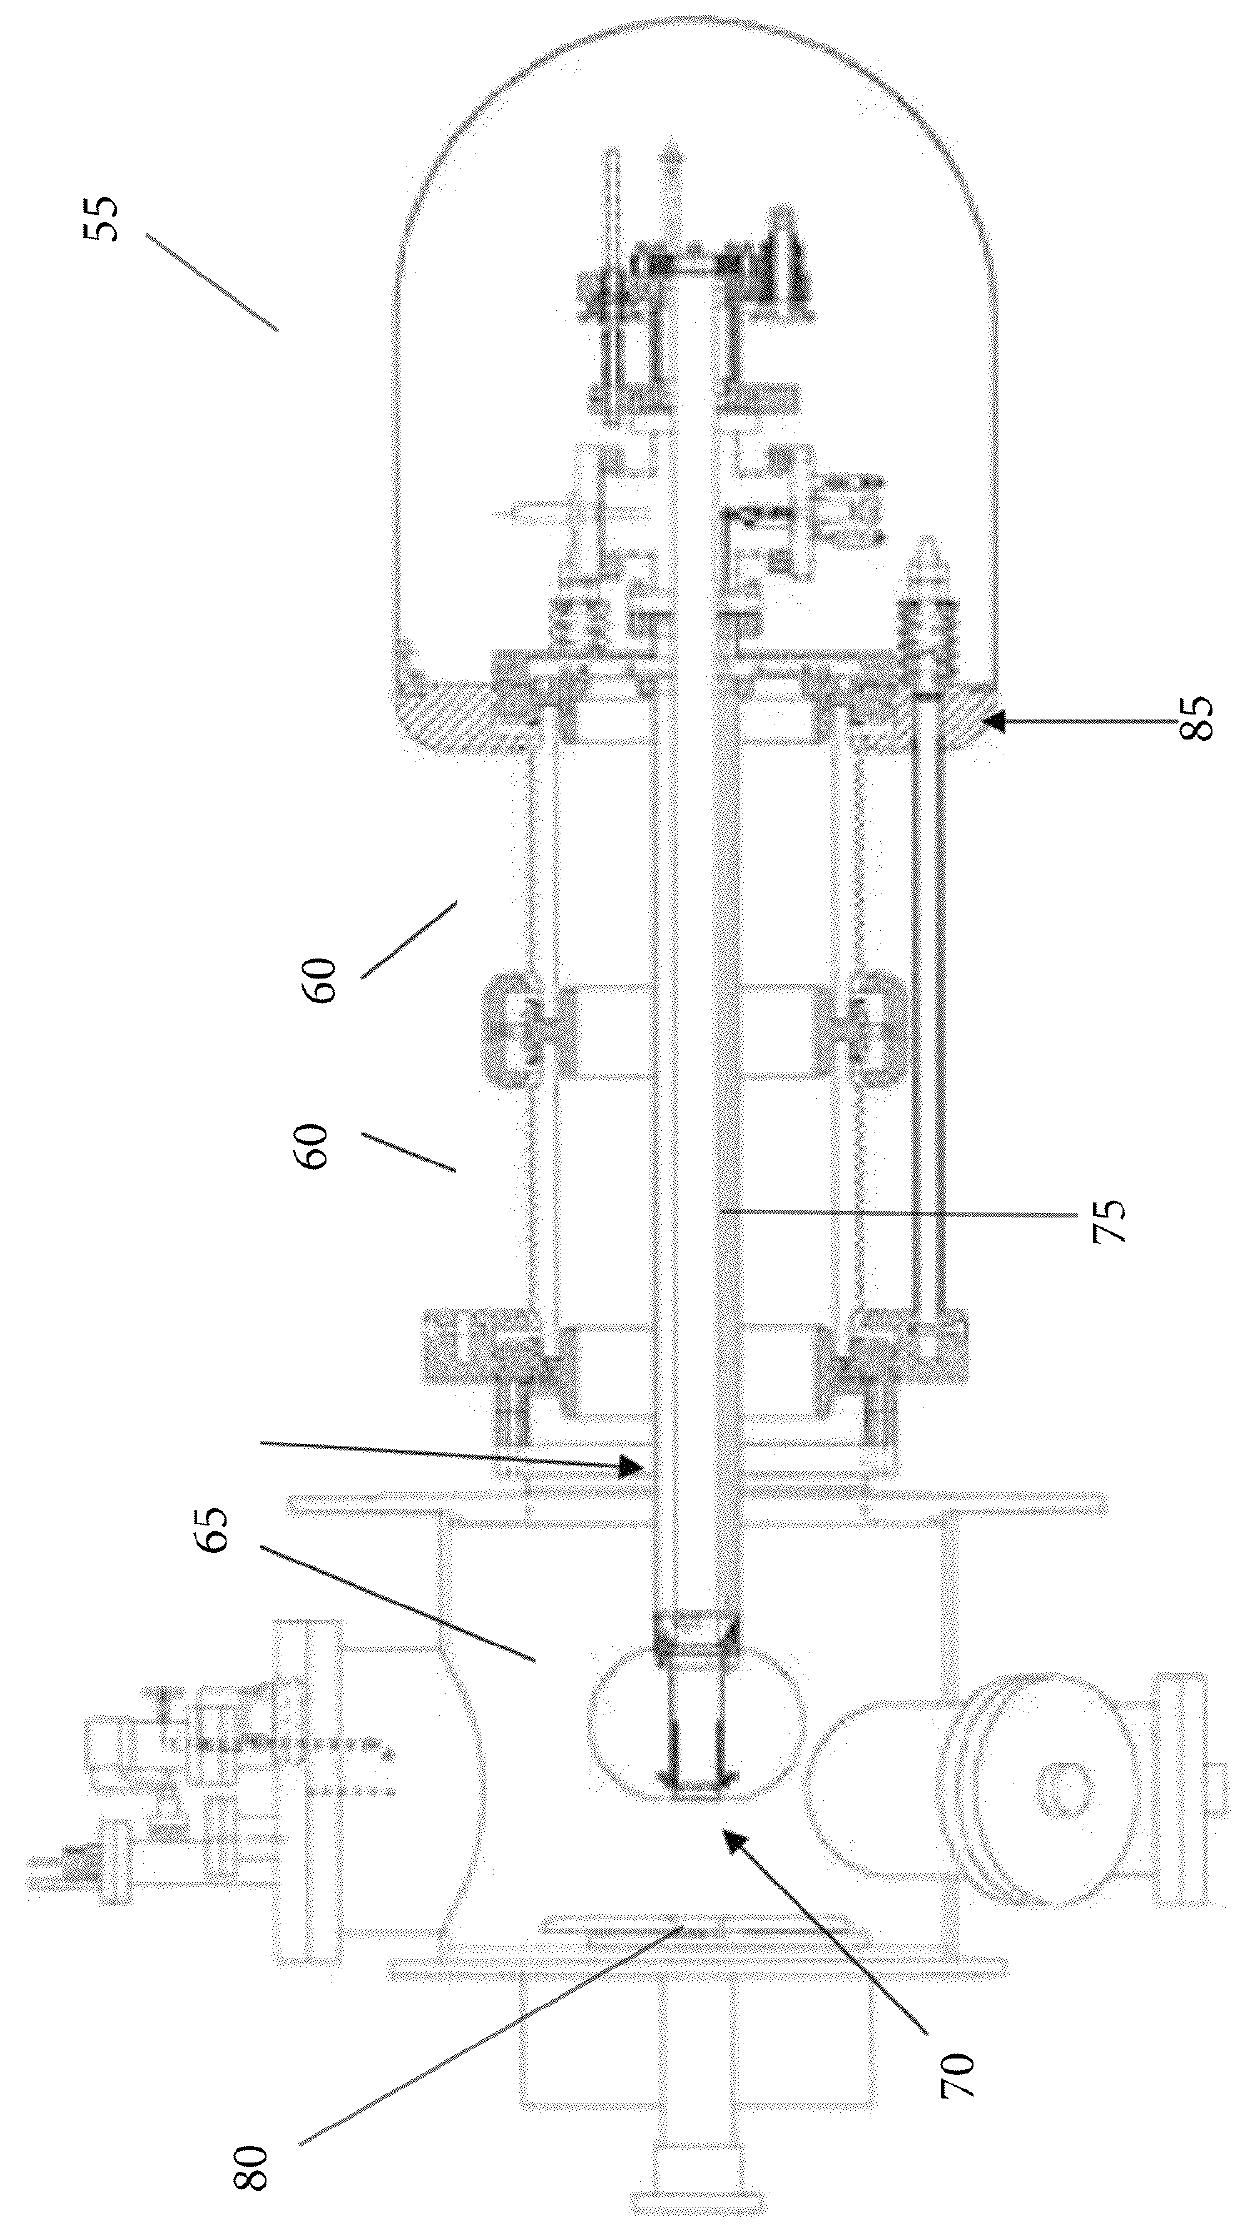 System for instrumenting and manipulating apparatuses in high voltage